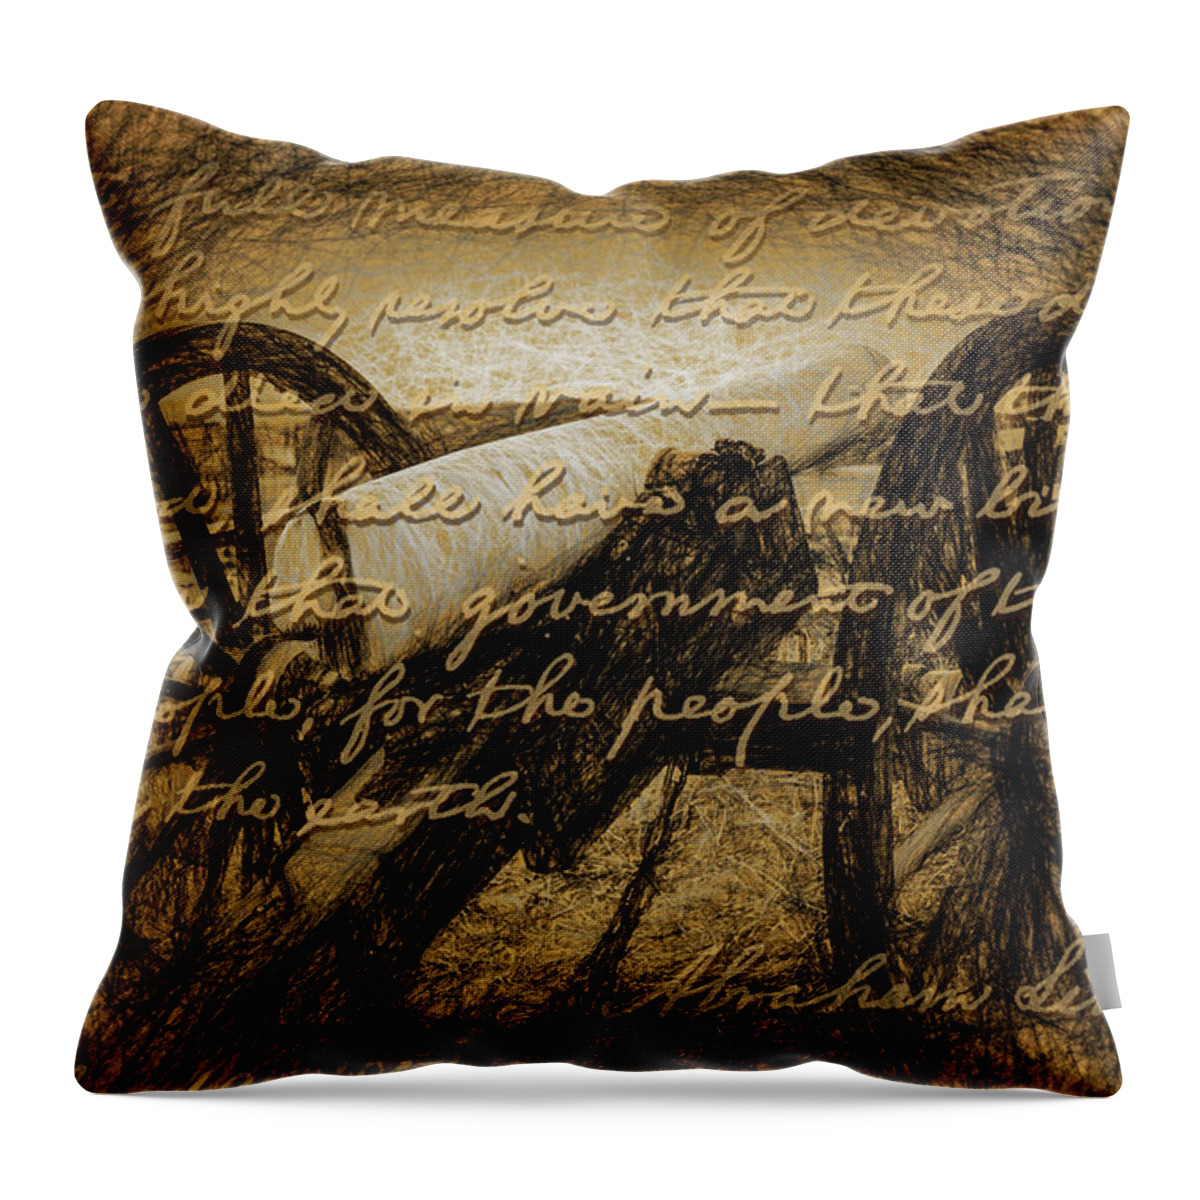 Gettysburg Throw Pillow featuring the digital art Gettysburg Cannon with Gettysburg Address by Barry Wills